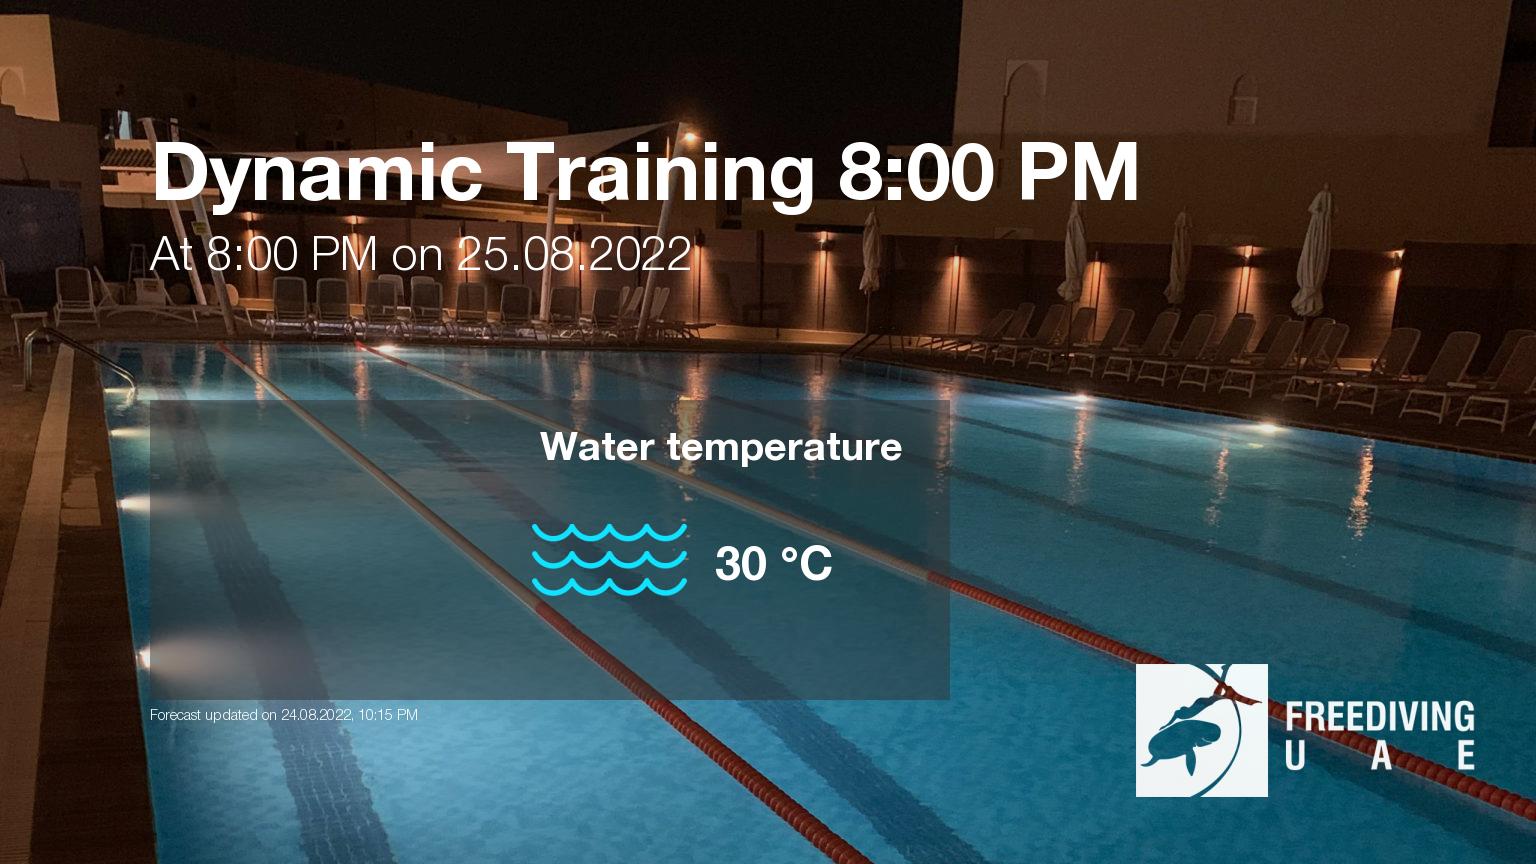 Expected weather during Dynamic Training 8:00 PM on Thu, Aug 25, at 8:00 PM